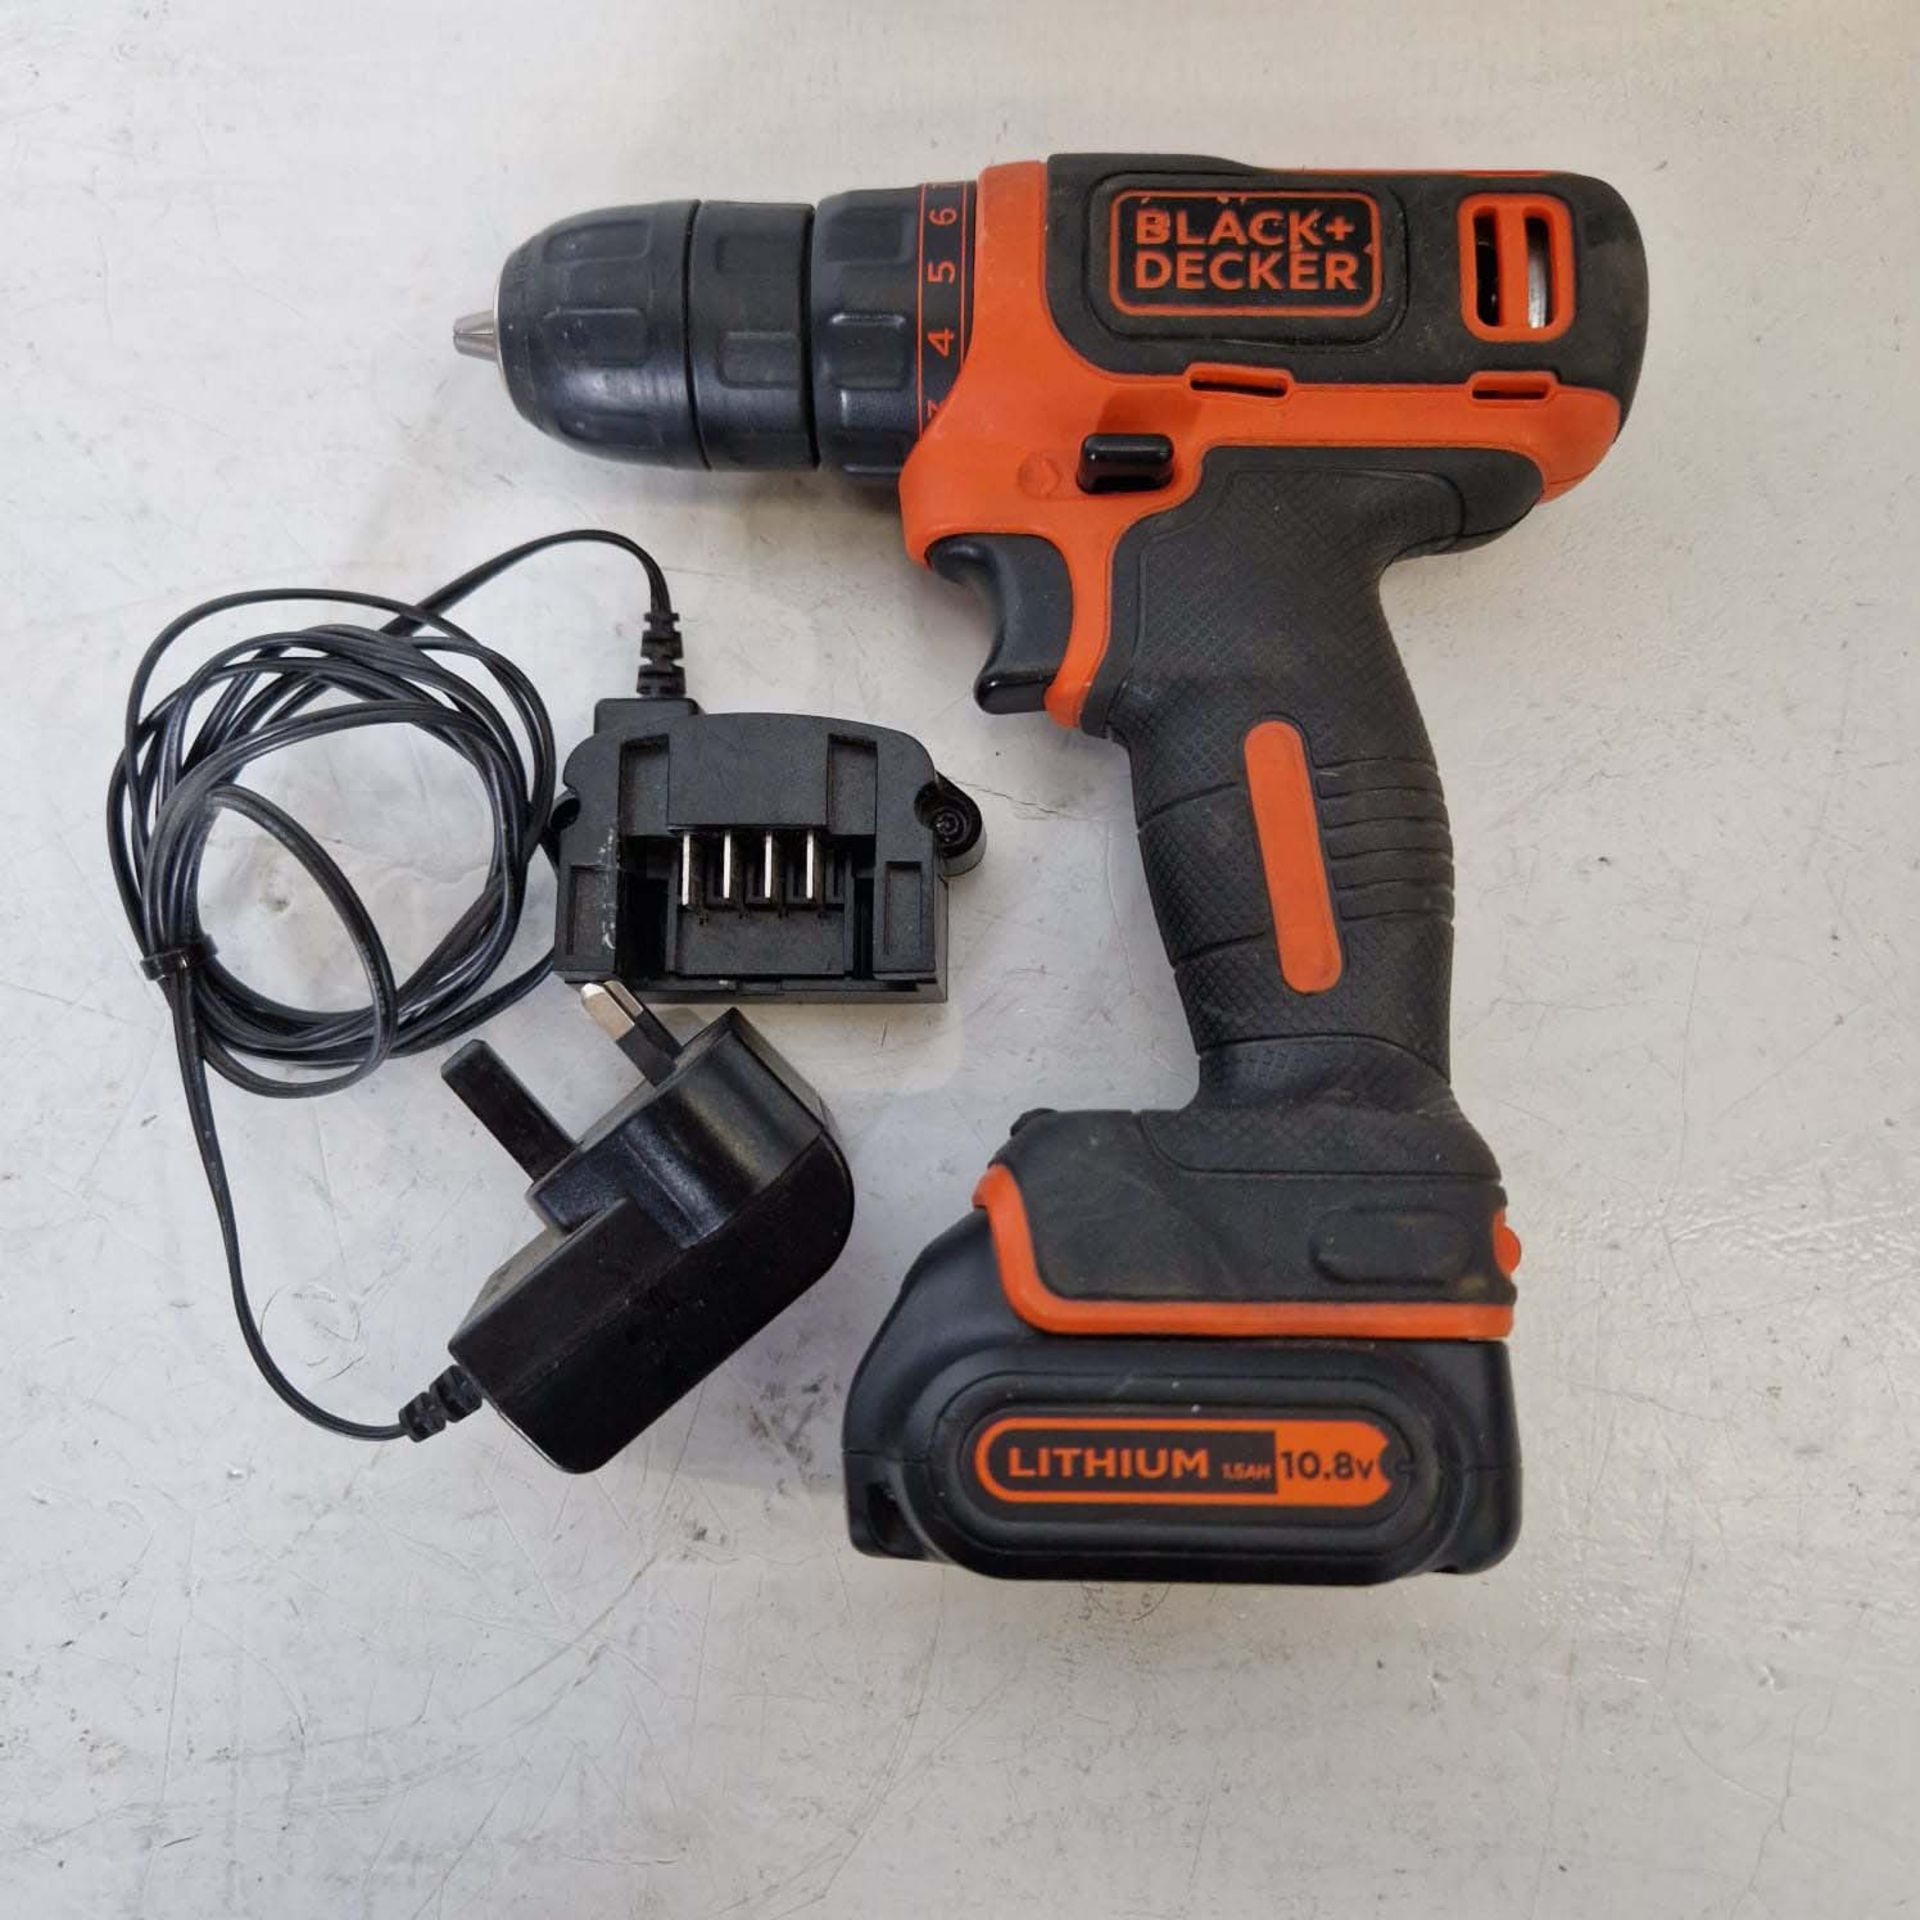 Black & Decker Model BDCDD12 Cordless Drill with Lithium 10.8V Battery & Charger. Capacity 10mm. - Image 2 of 4